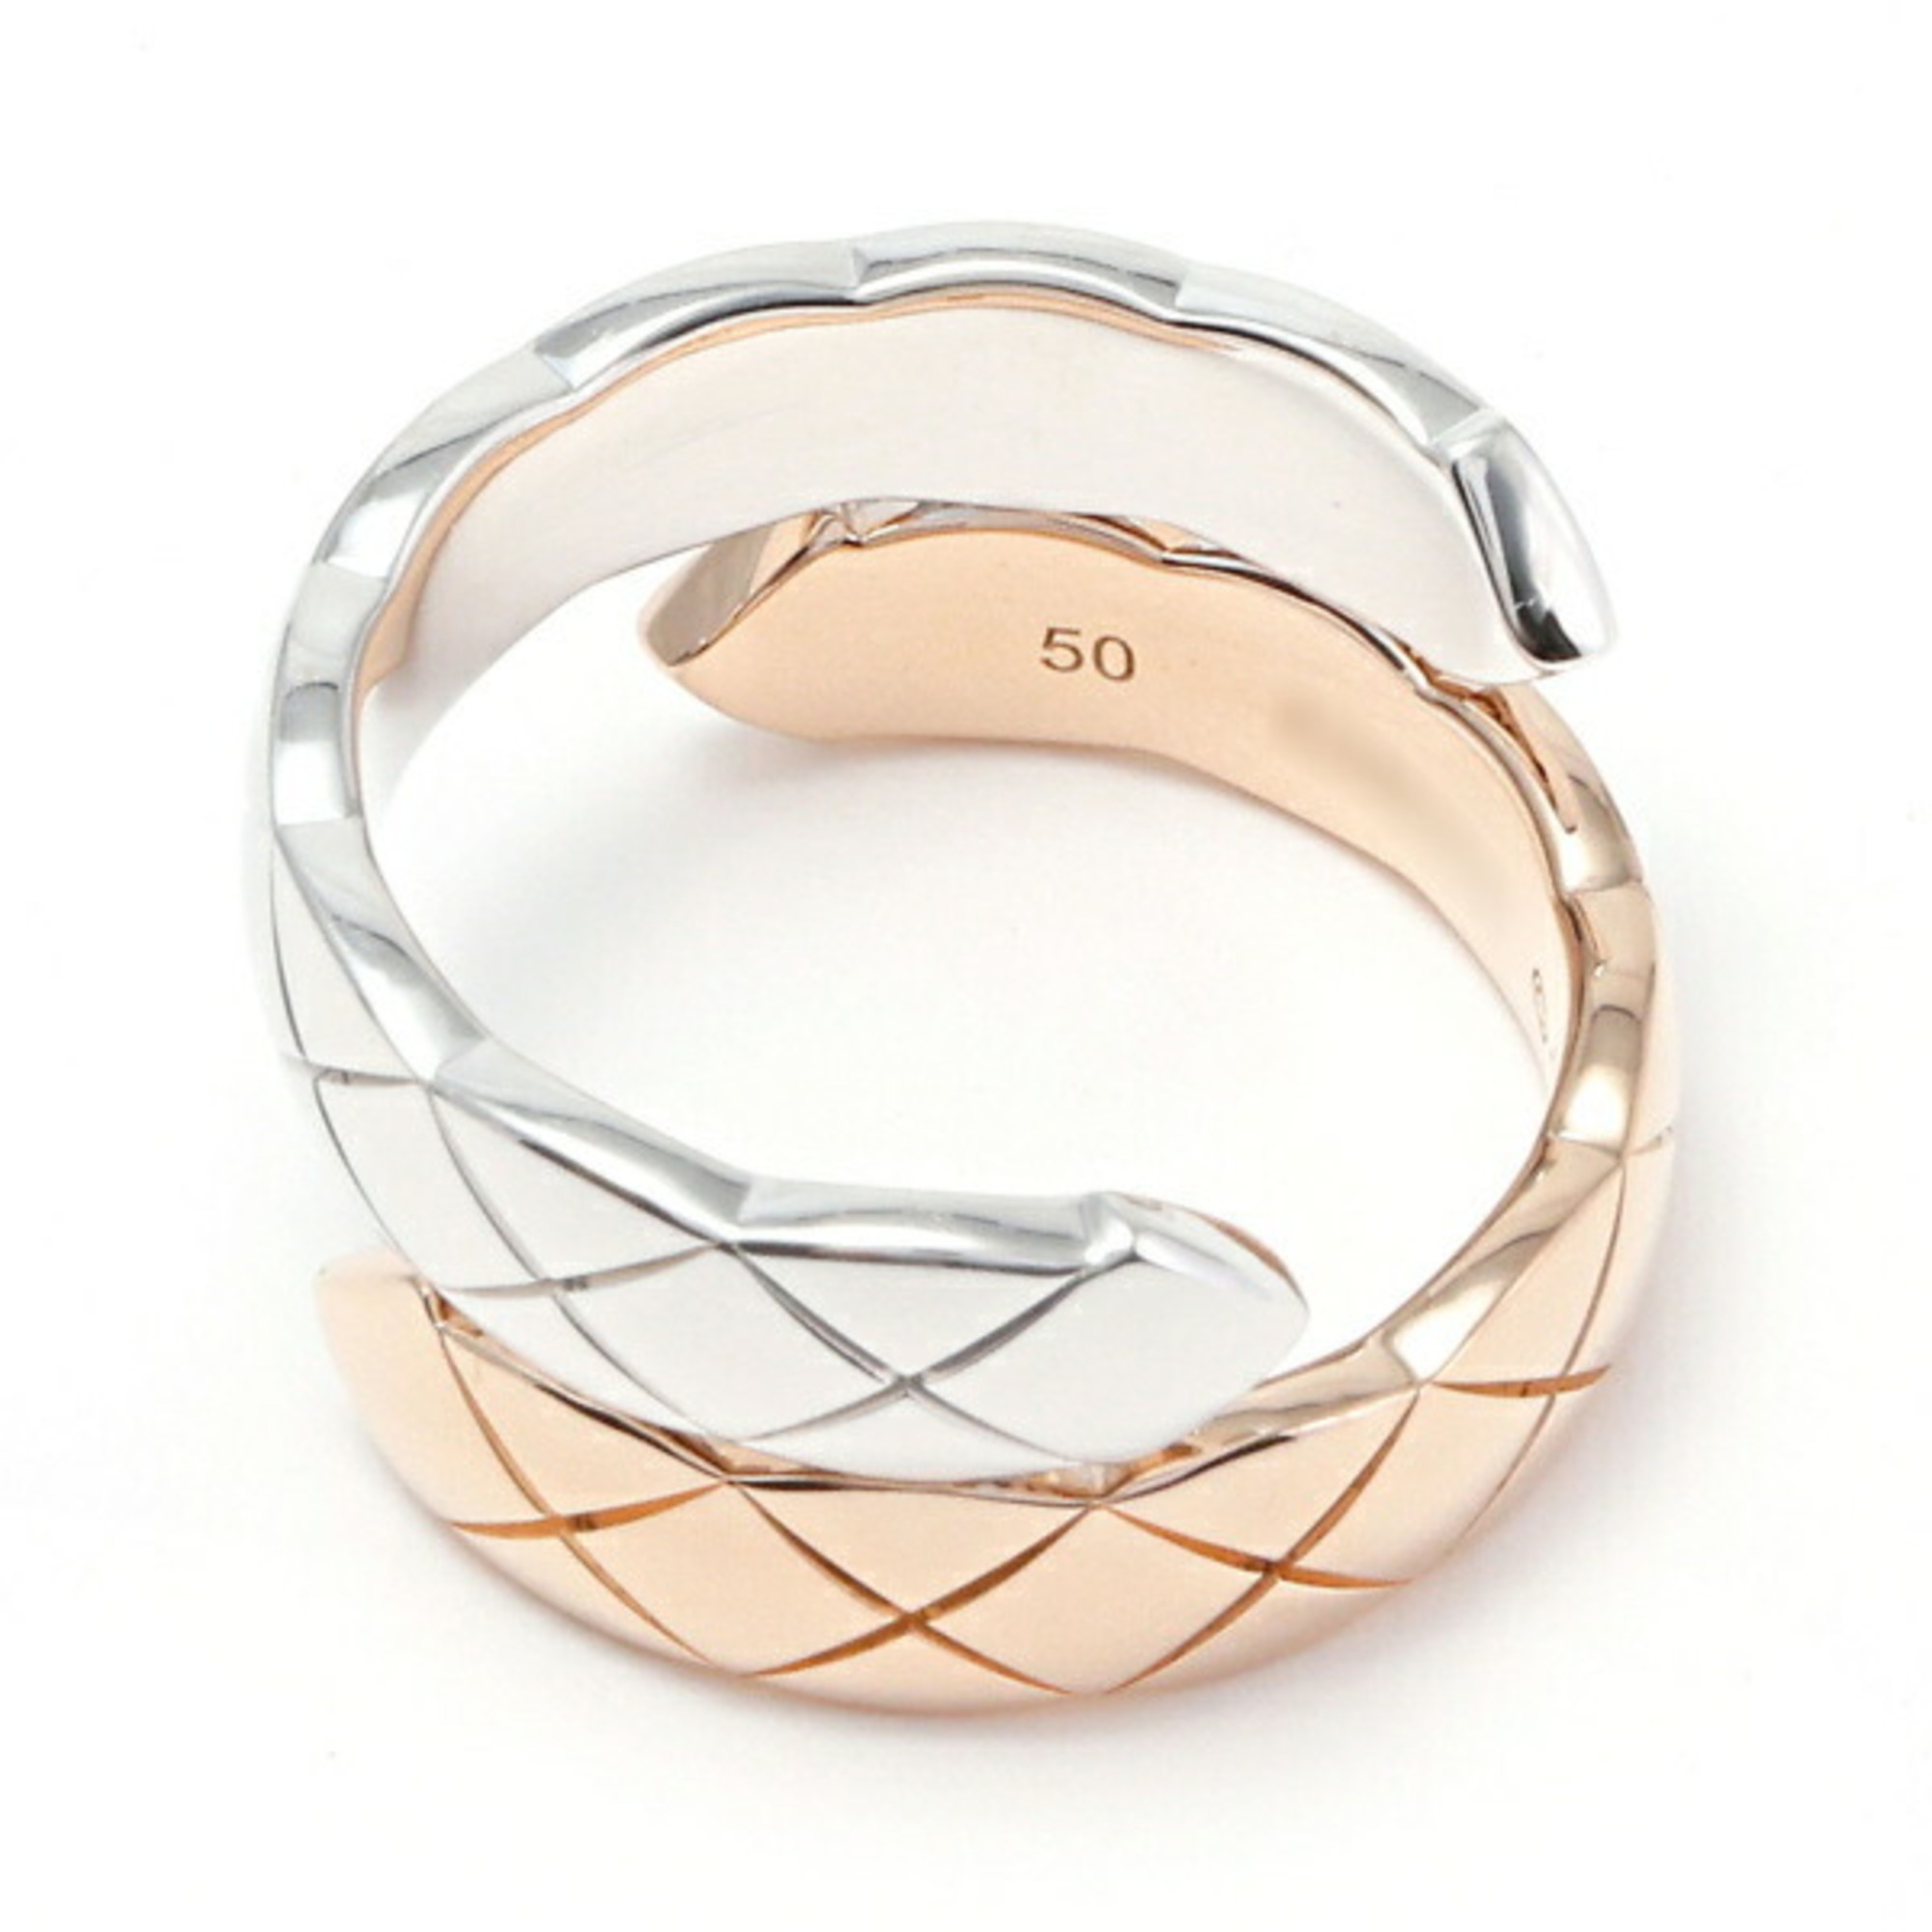 Chanel Coco Crush Large K18PG Pink Gold K18WG White Ring